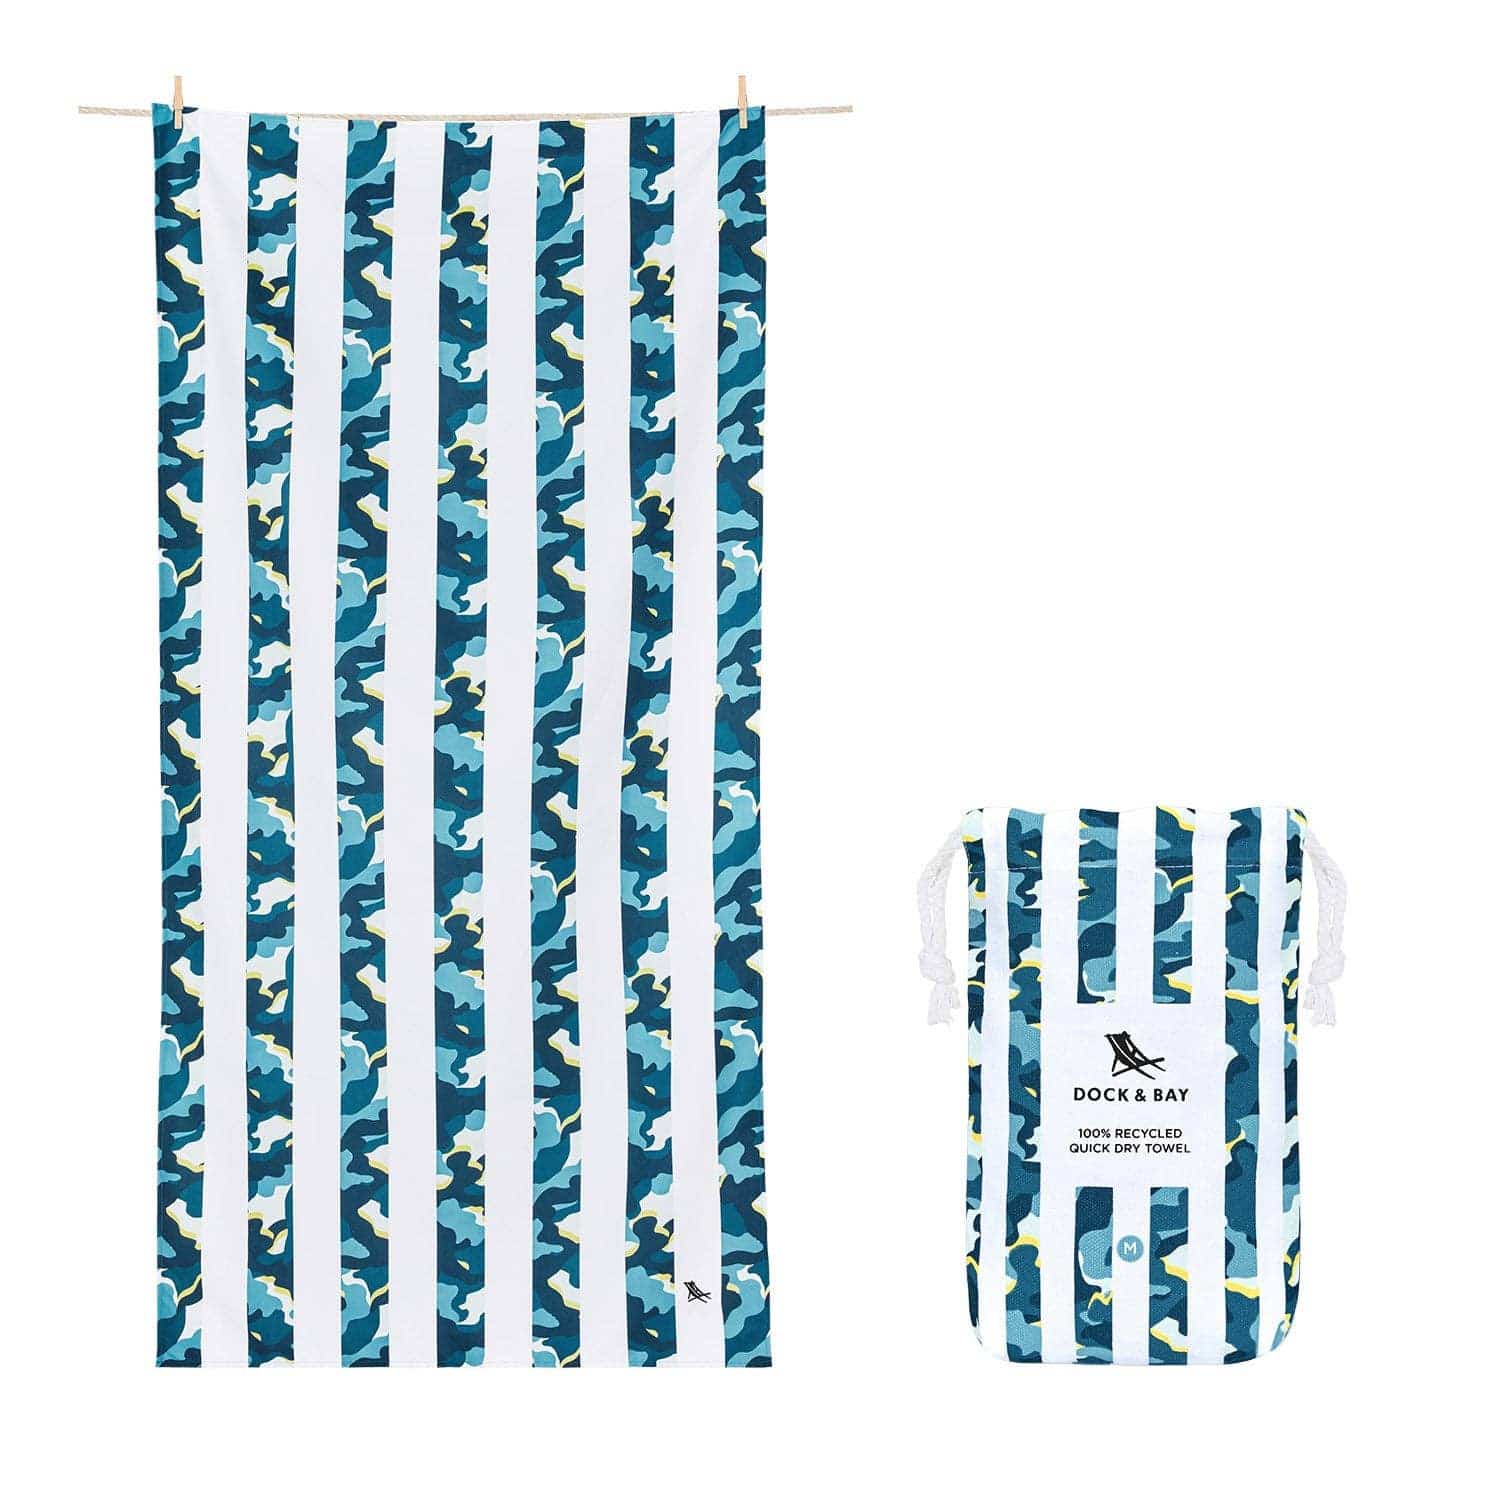 Kids Beach Towel in Cool Camo - 2 sizes - The Preppy Bunny